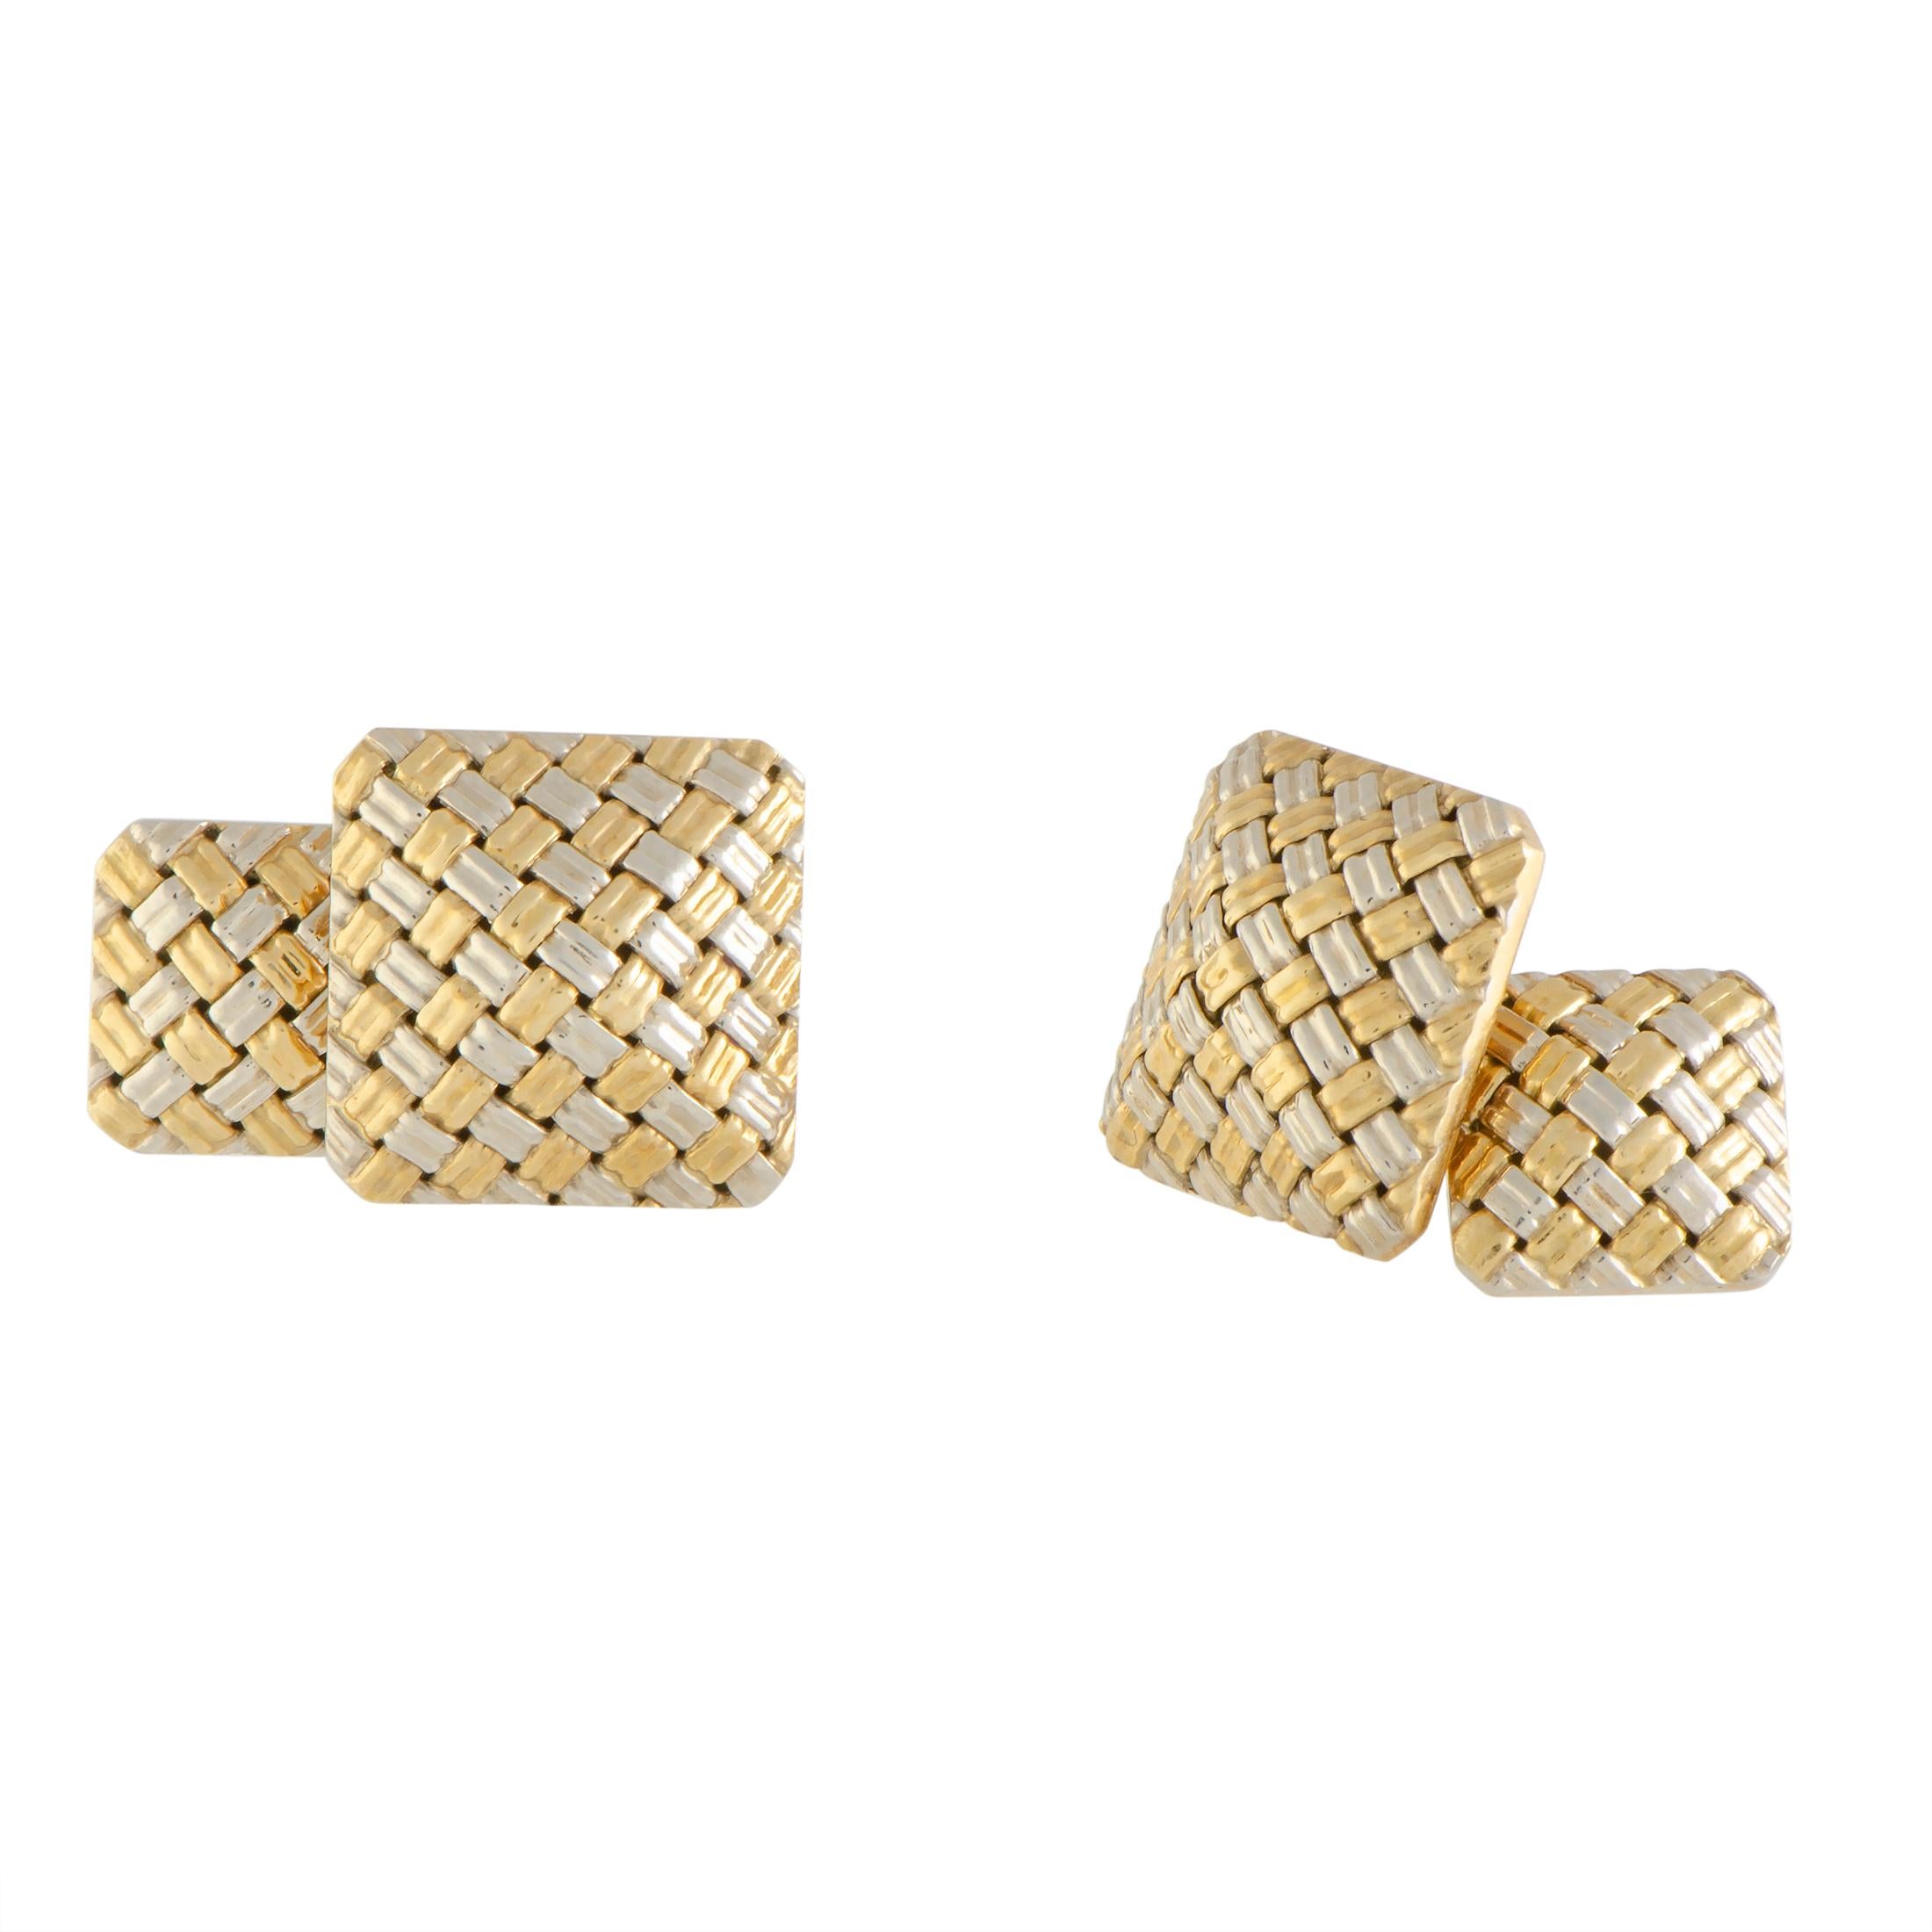 Cartier Vintage Yellow and White Gold Basket Weave Square Cufflinks